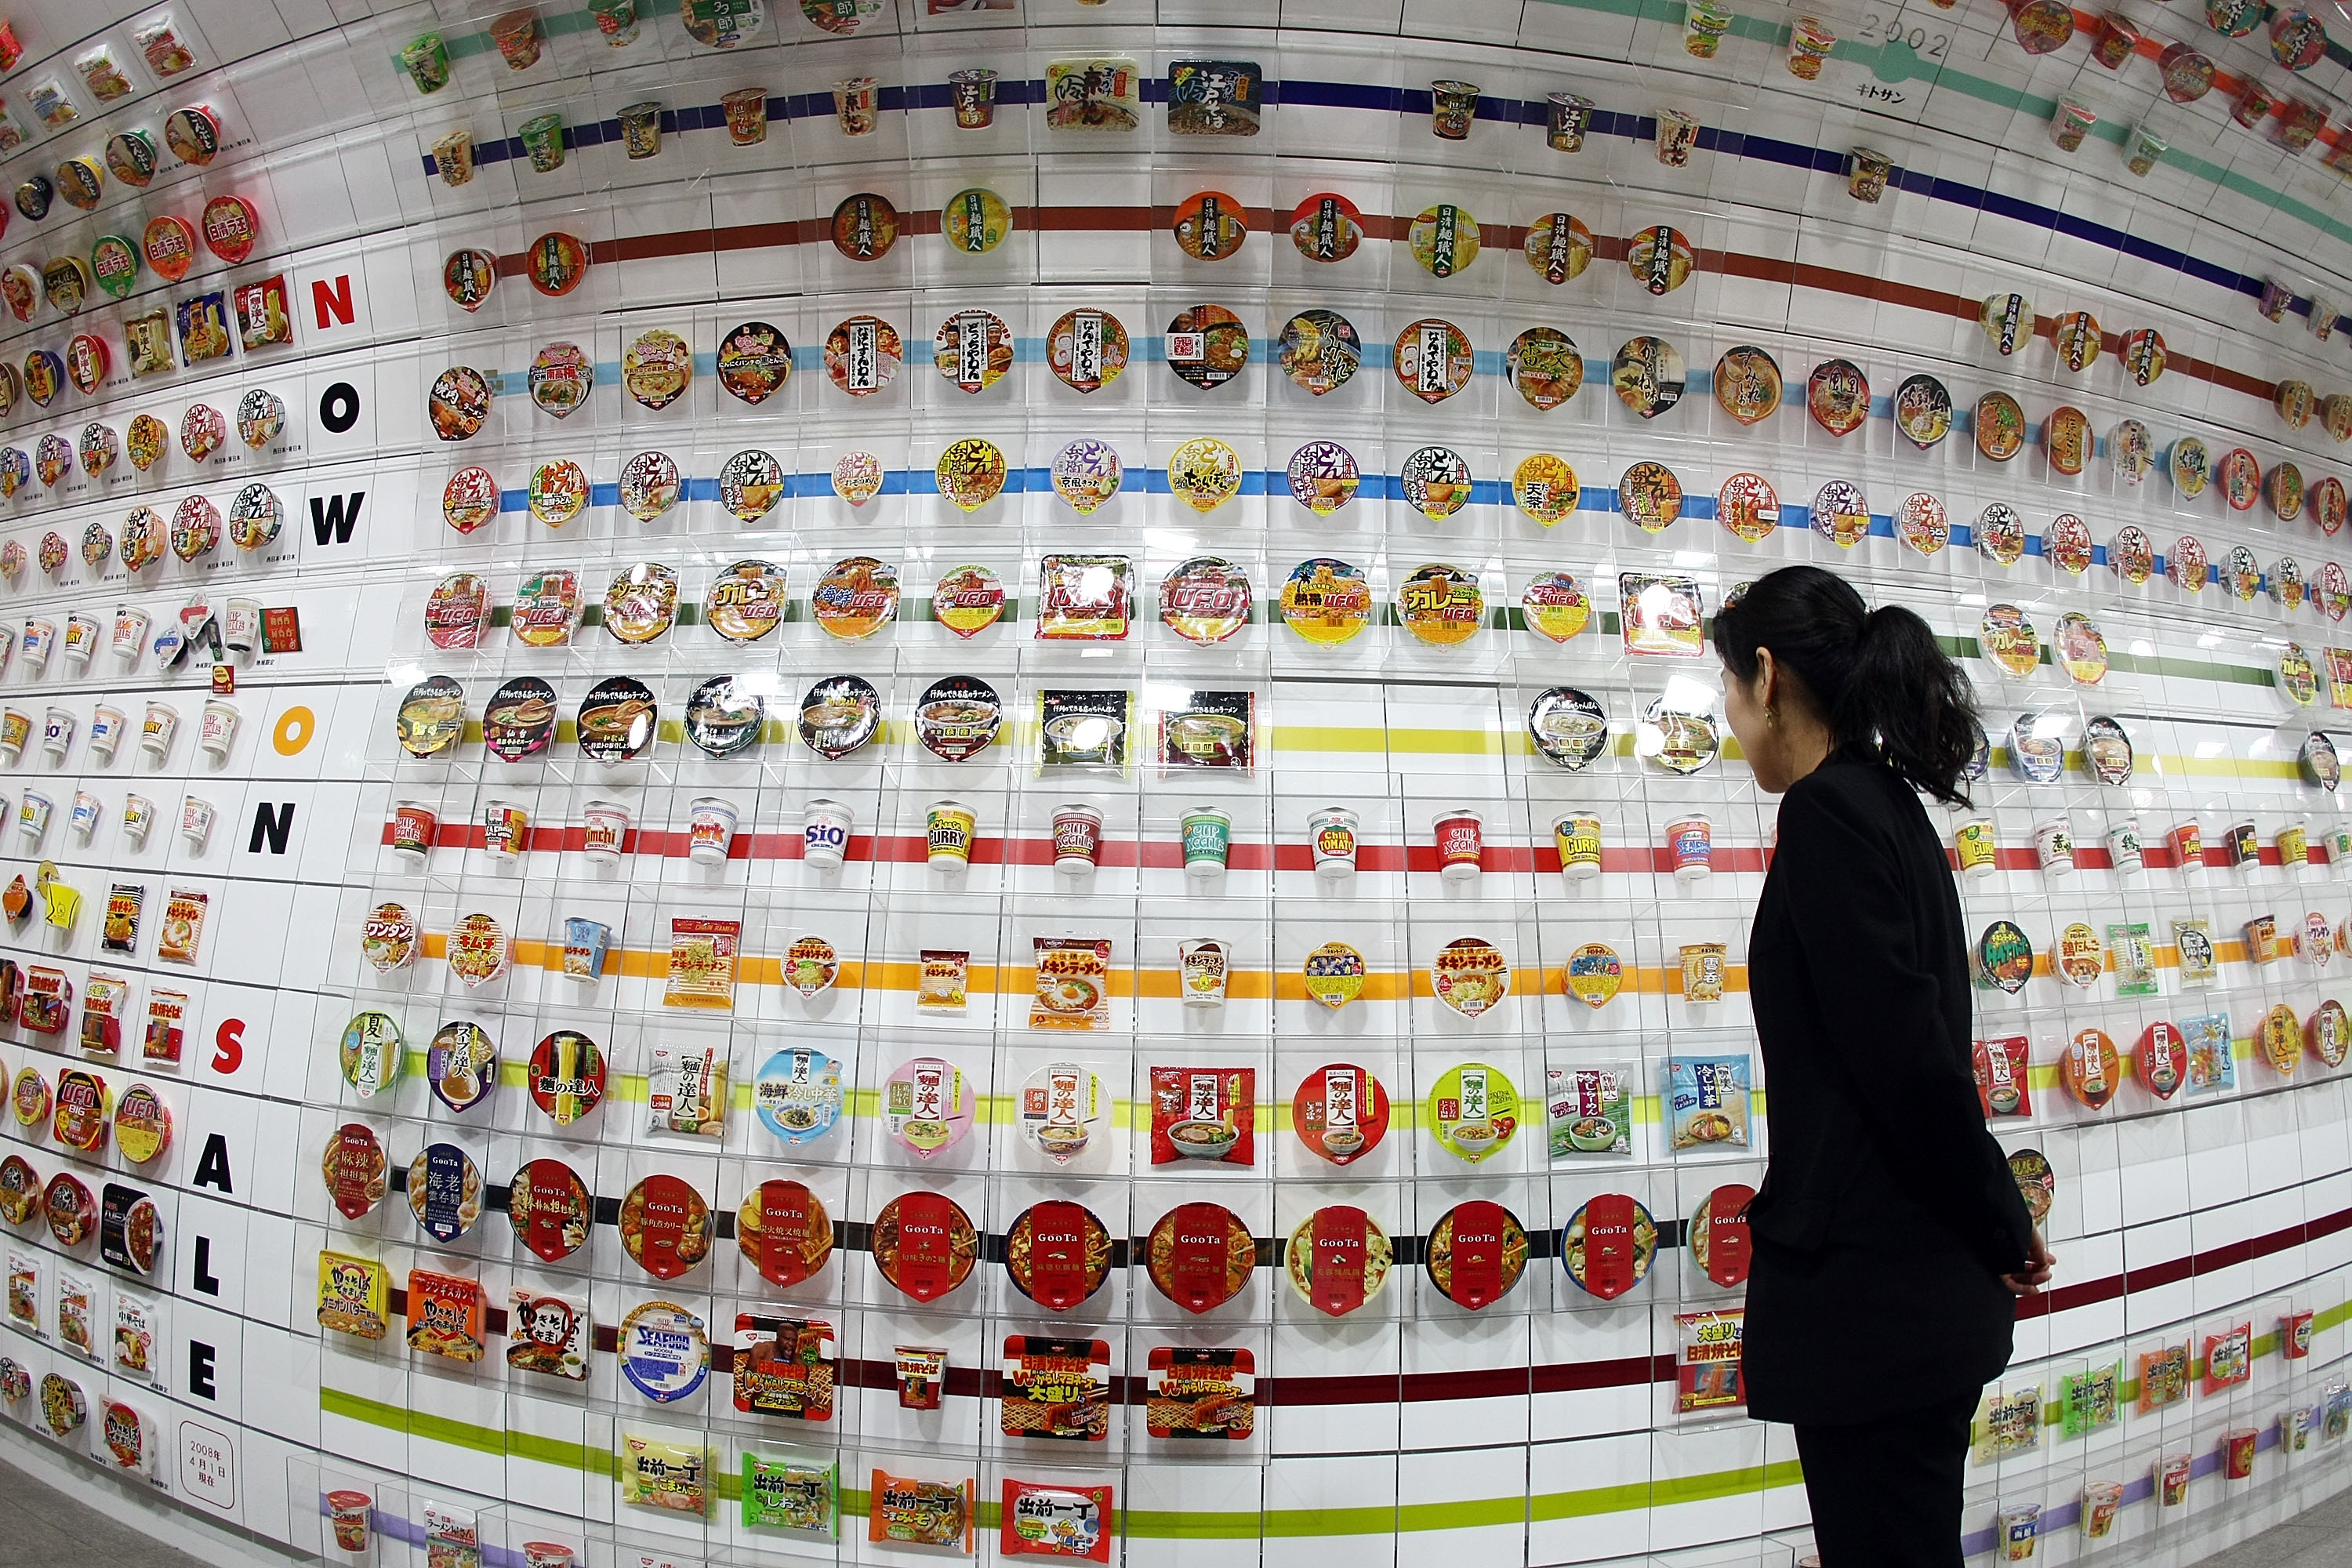 Instant cup noodles are on display at the Instant Ramen Museum on April 8, 2008 in Osaka, Japan. (Junko Kimura—Getty Images)